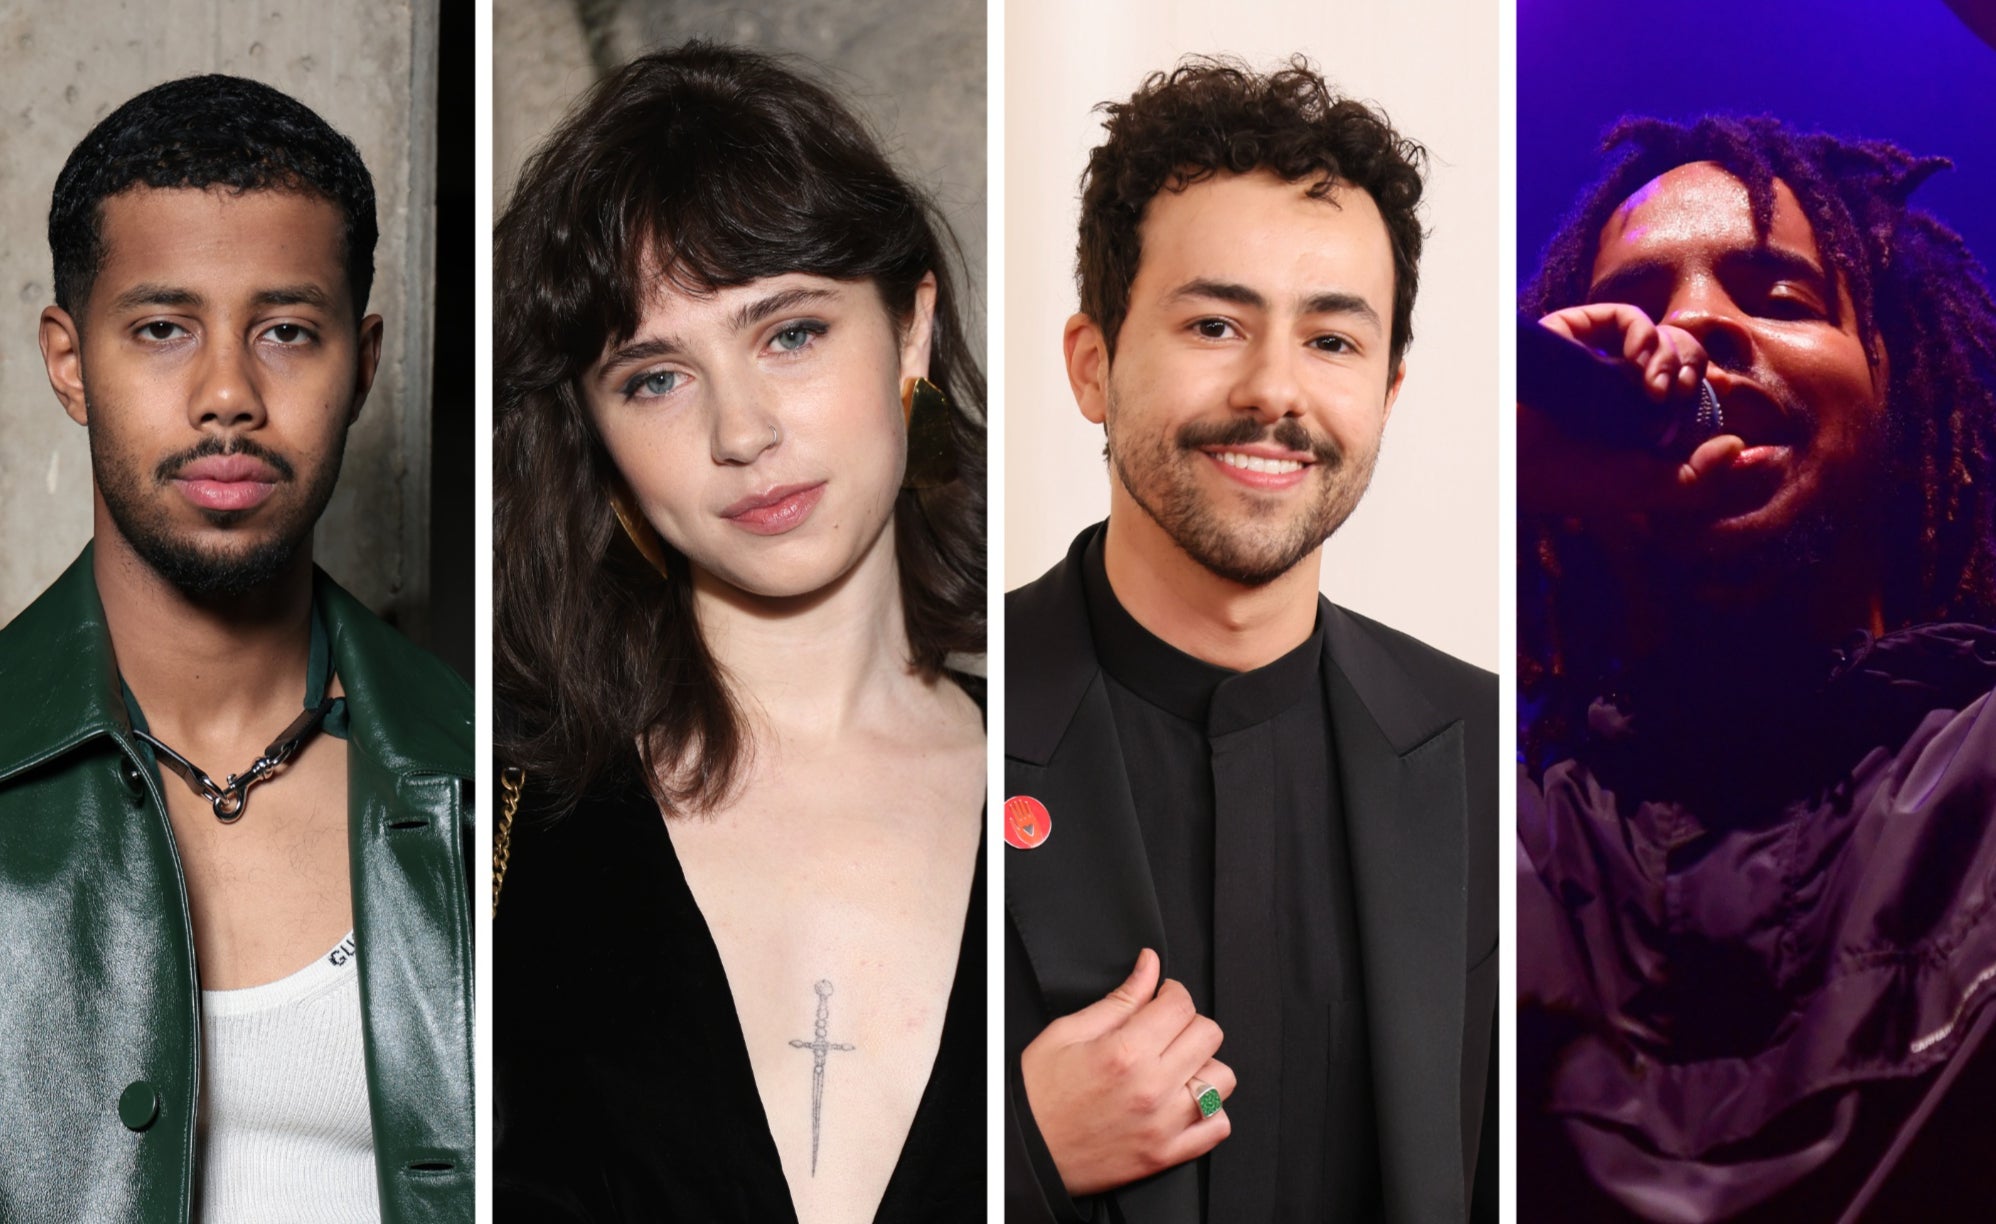 Mustafa the Poet, Clairo, Ramy Yousef, and Earl Sweatshirt are all taking part in the event